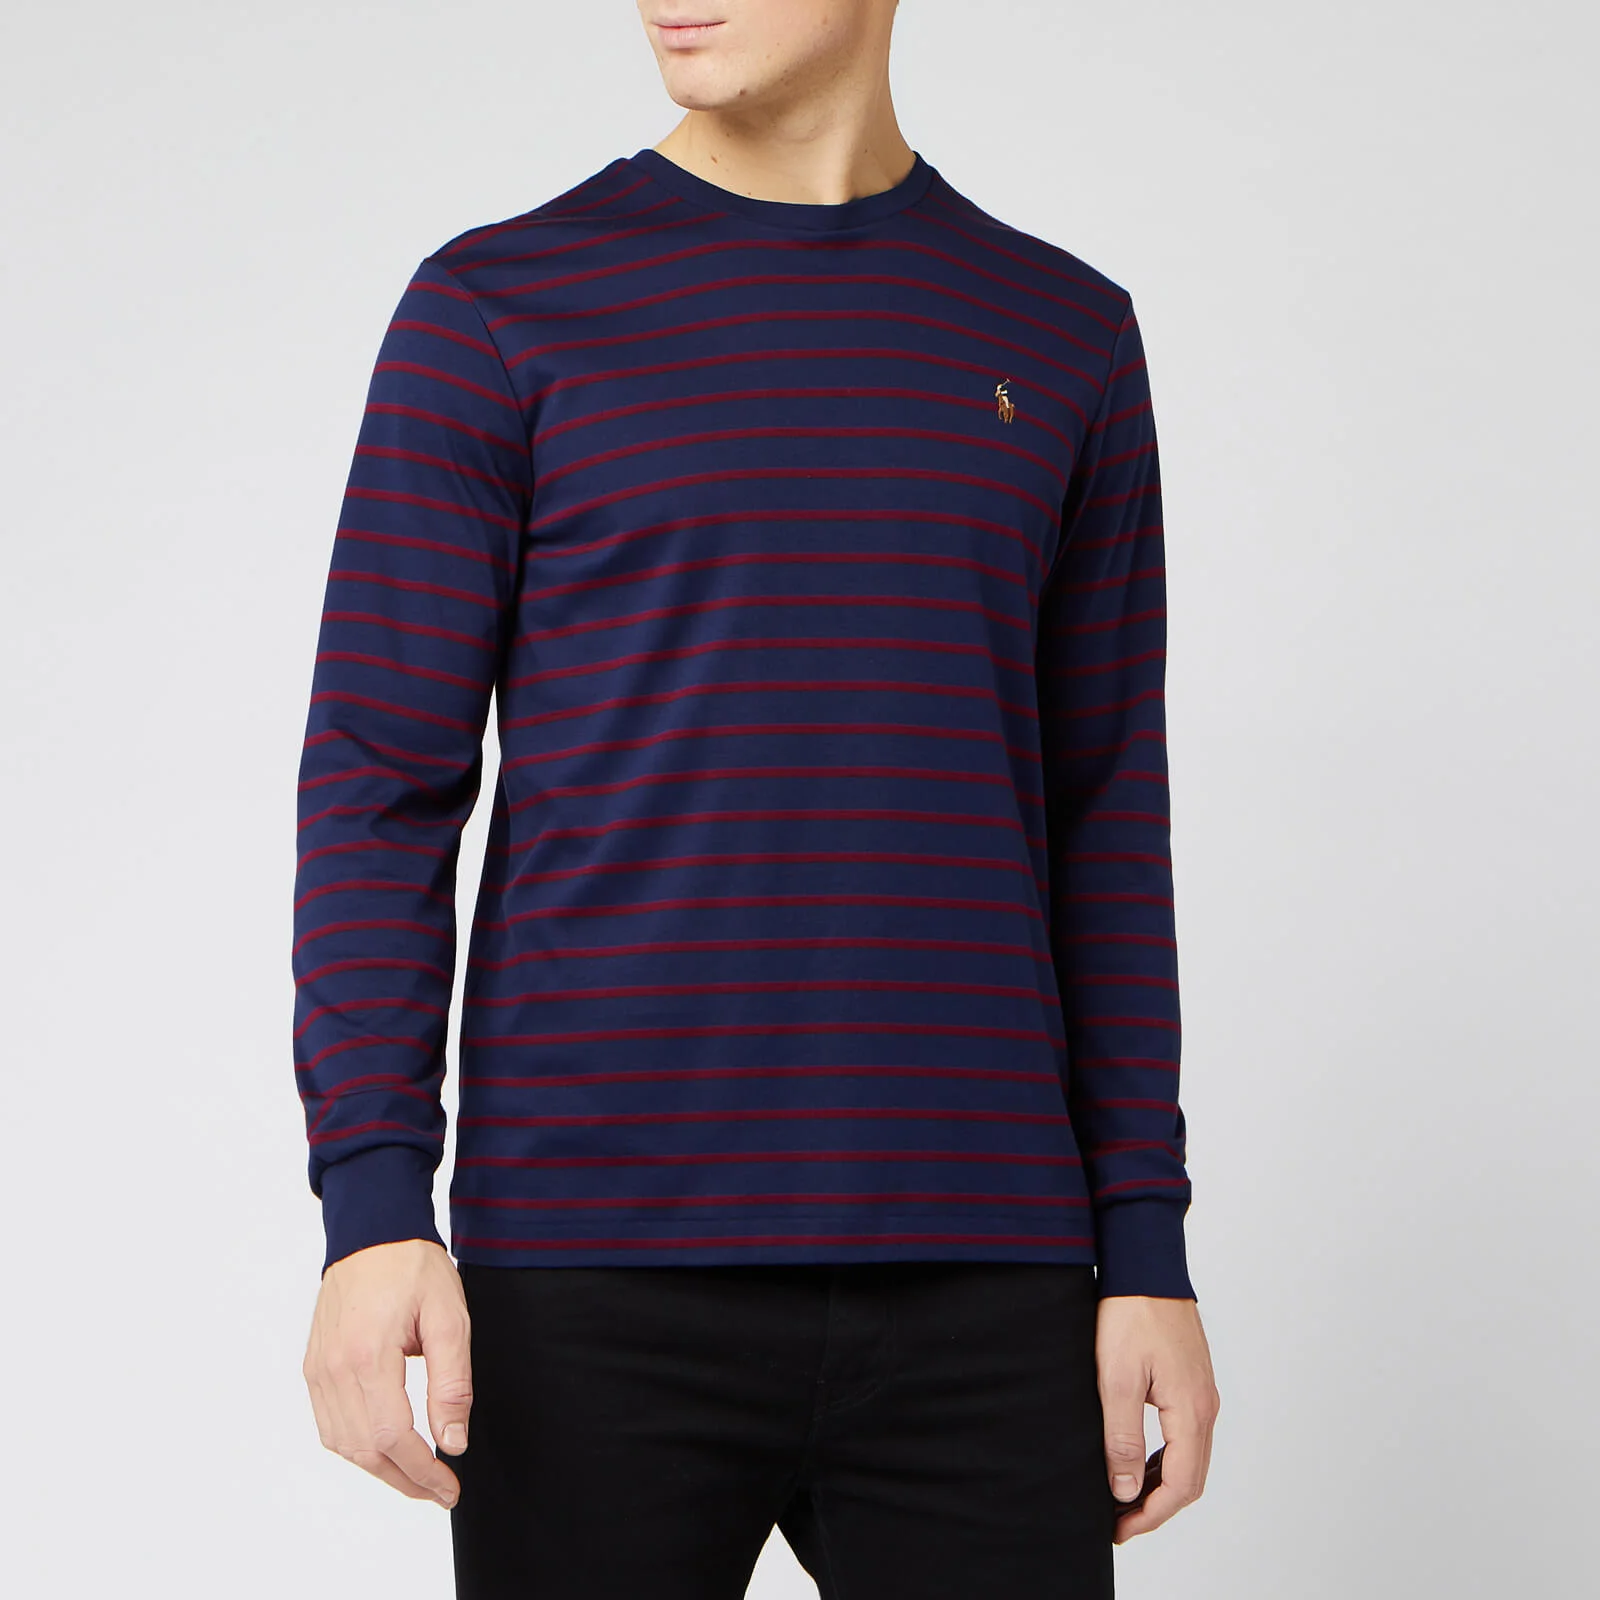 Polo Ralph Lauren Men's Long Sleeve Pima Soft Touch Stripe Top - French Navy/Classic Wine Image 1